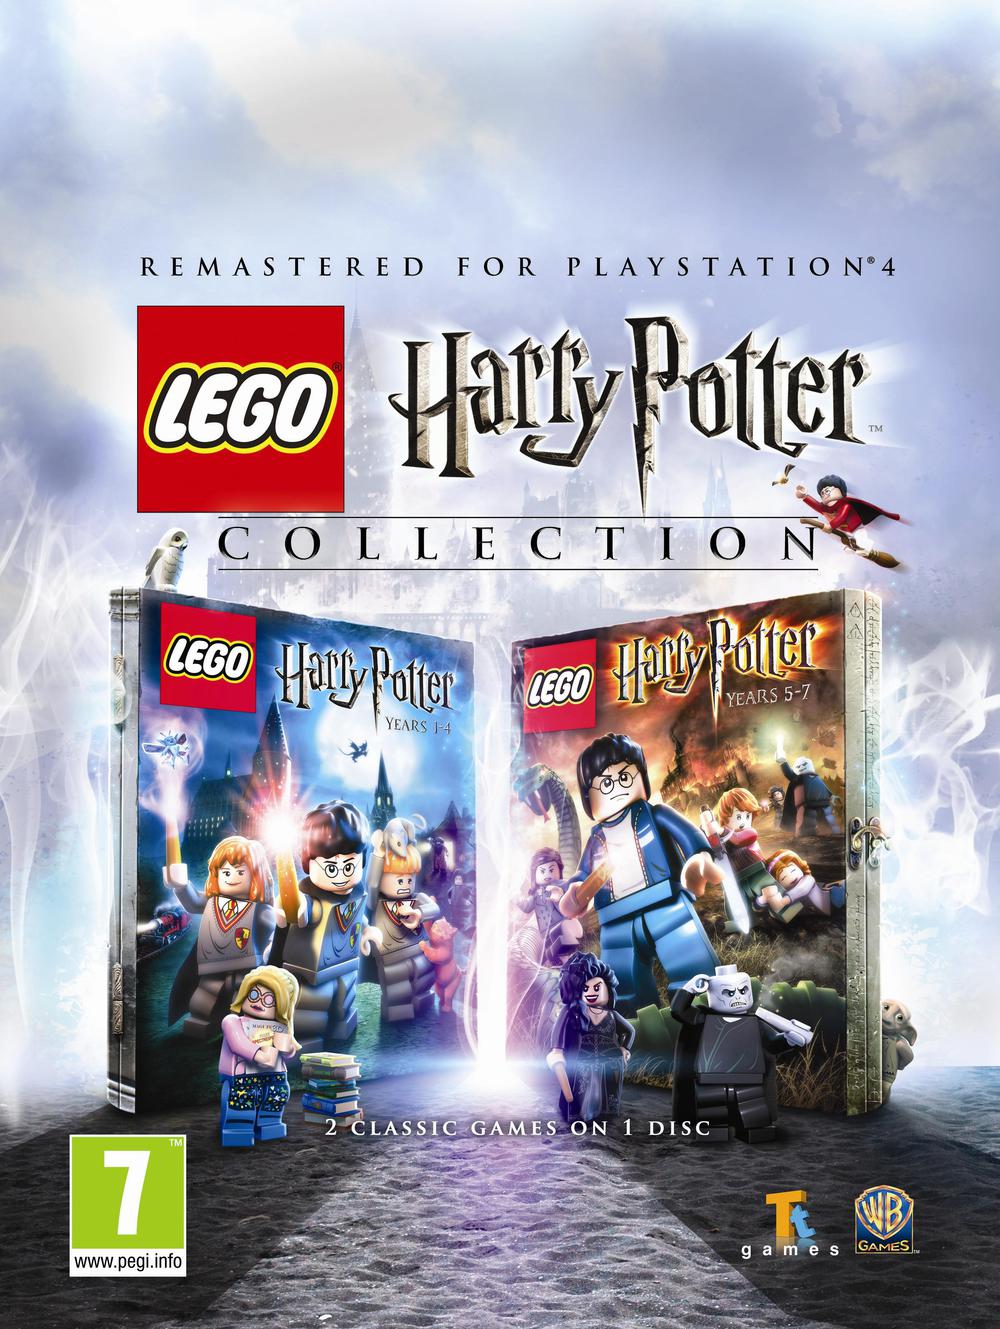 vamers-fyi-video-gaming-lego-harry-potter-returns-with-remastered-lego-collection-01